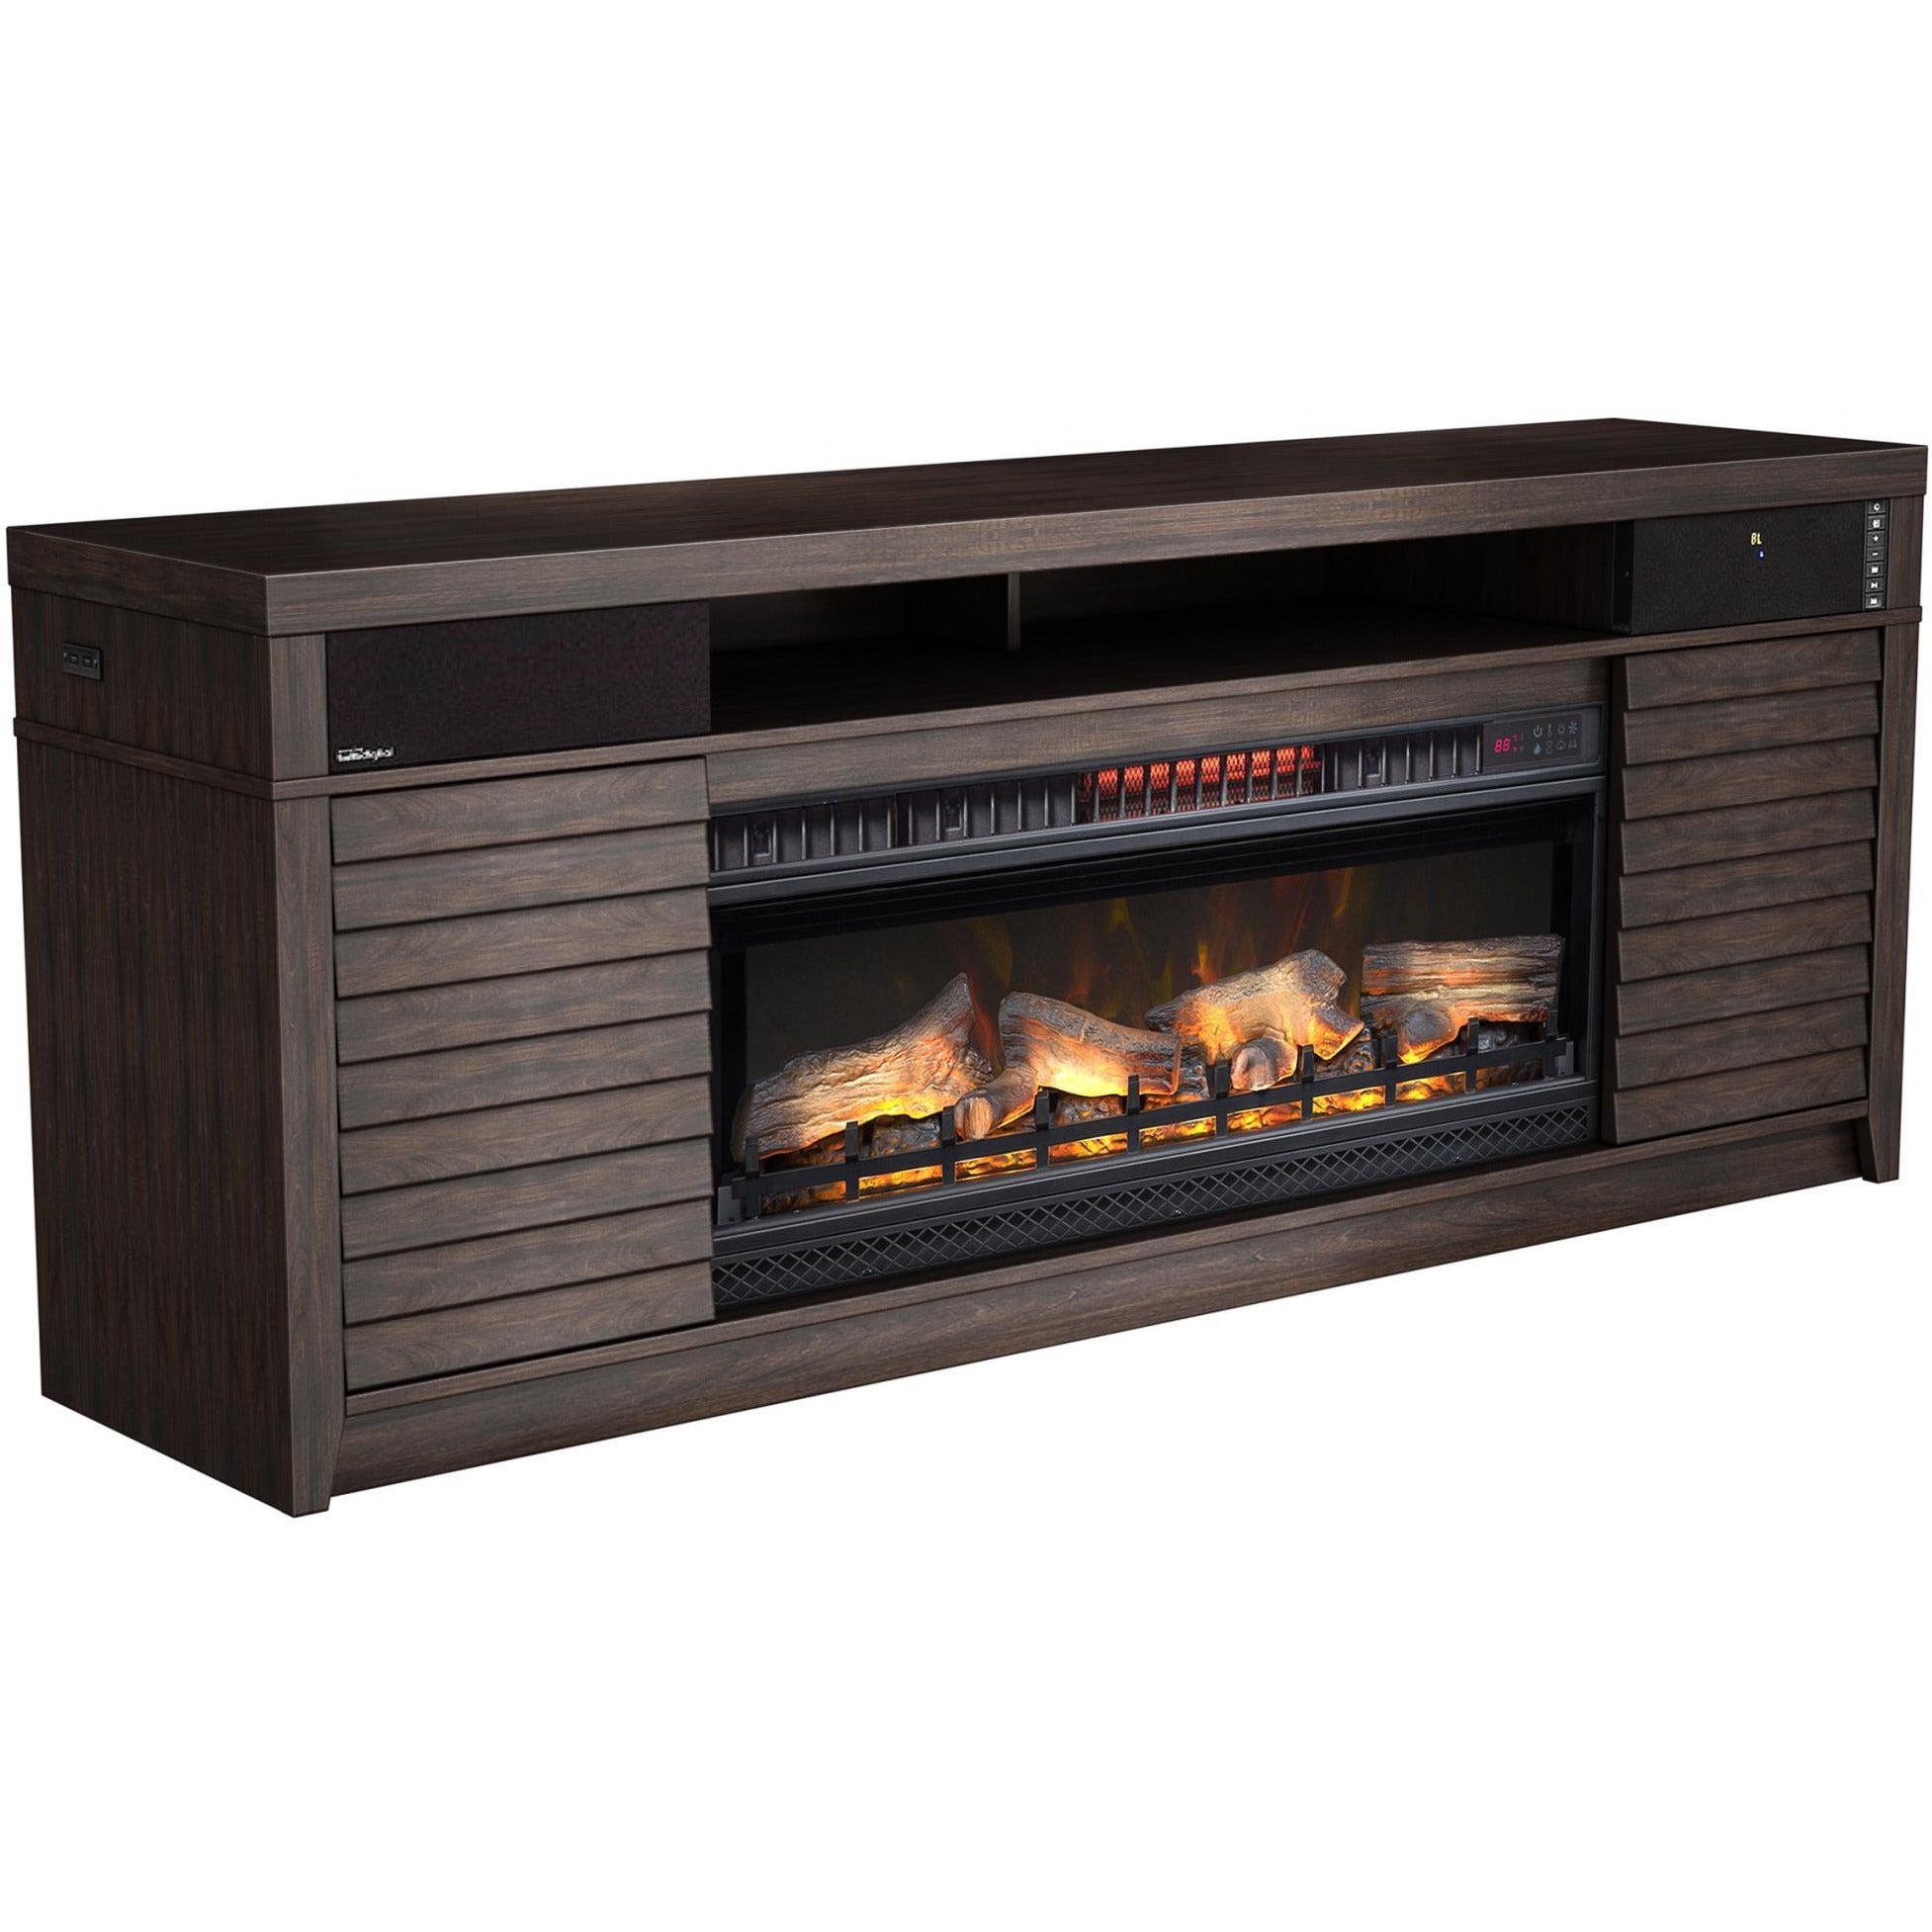 McCalloway Media Mantel with Speakers